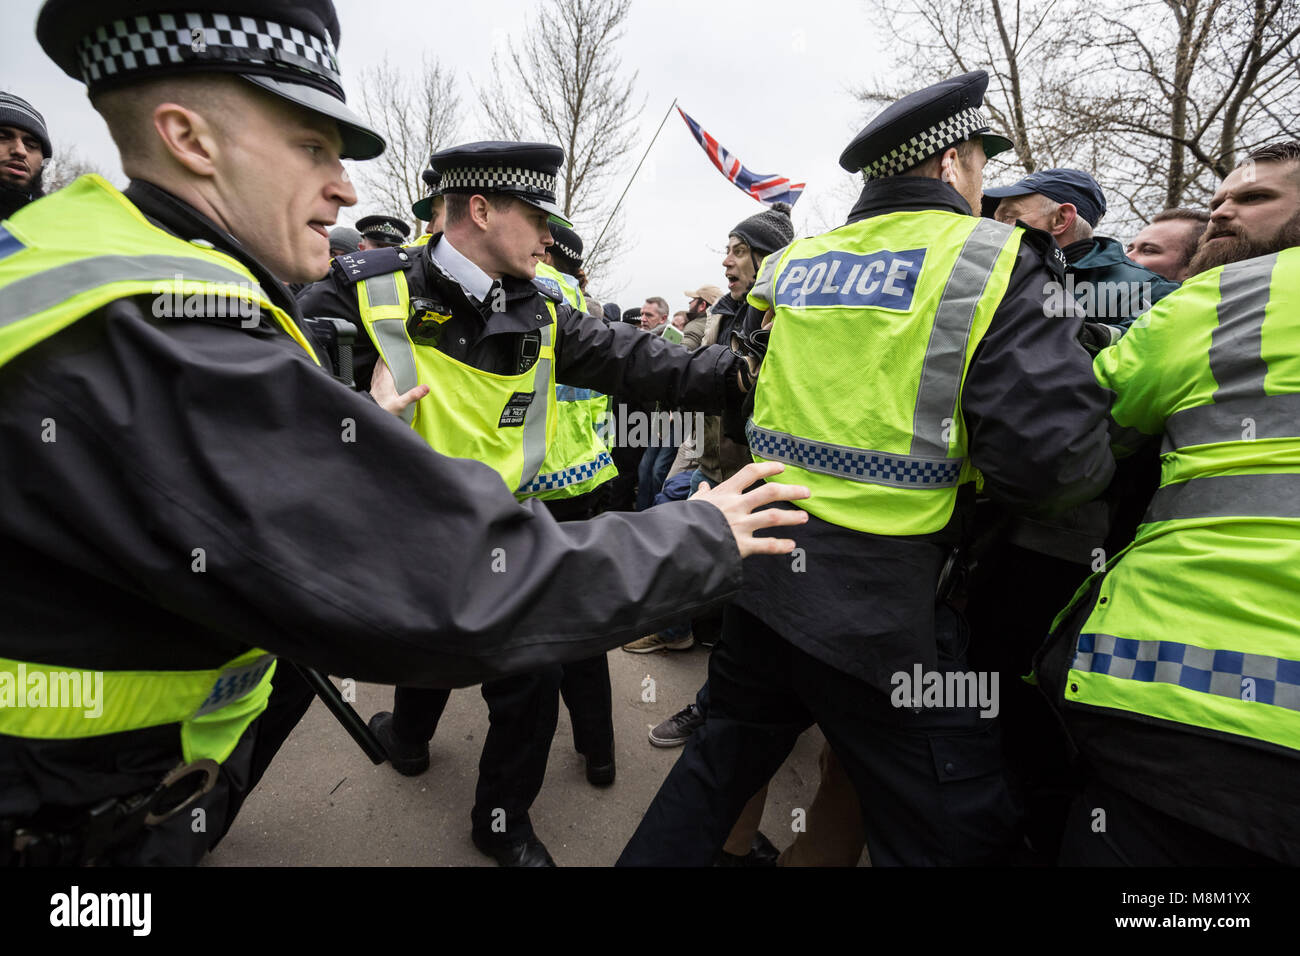 London, UK. 18th March, 2018. Hundreds gather at Speakers’ Corner, Hyde Park waiting to hear a speech written by Generation Identity’s Martin Sellner, delivered by former EDL leader Tommy Robinson. Credit: Guy Corbishley/Alamy Live News Stock Photo